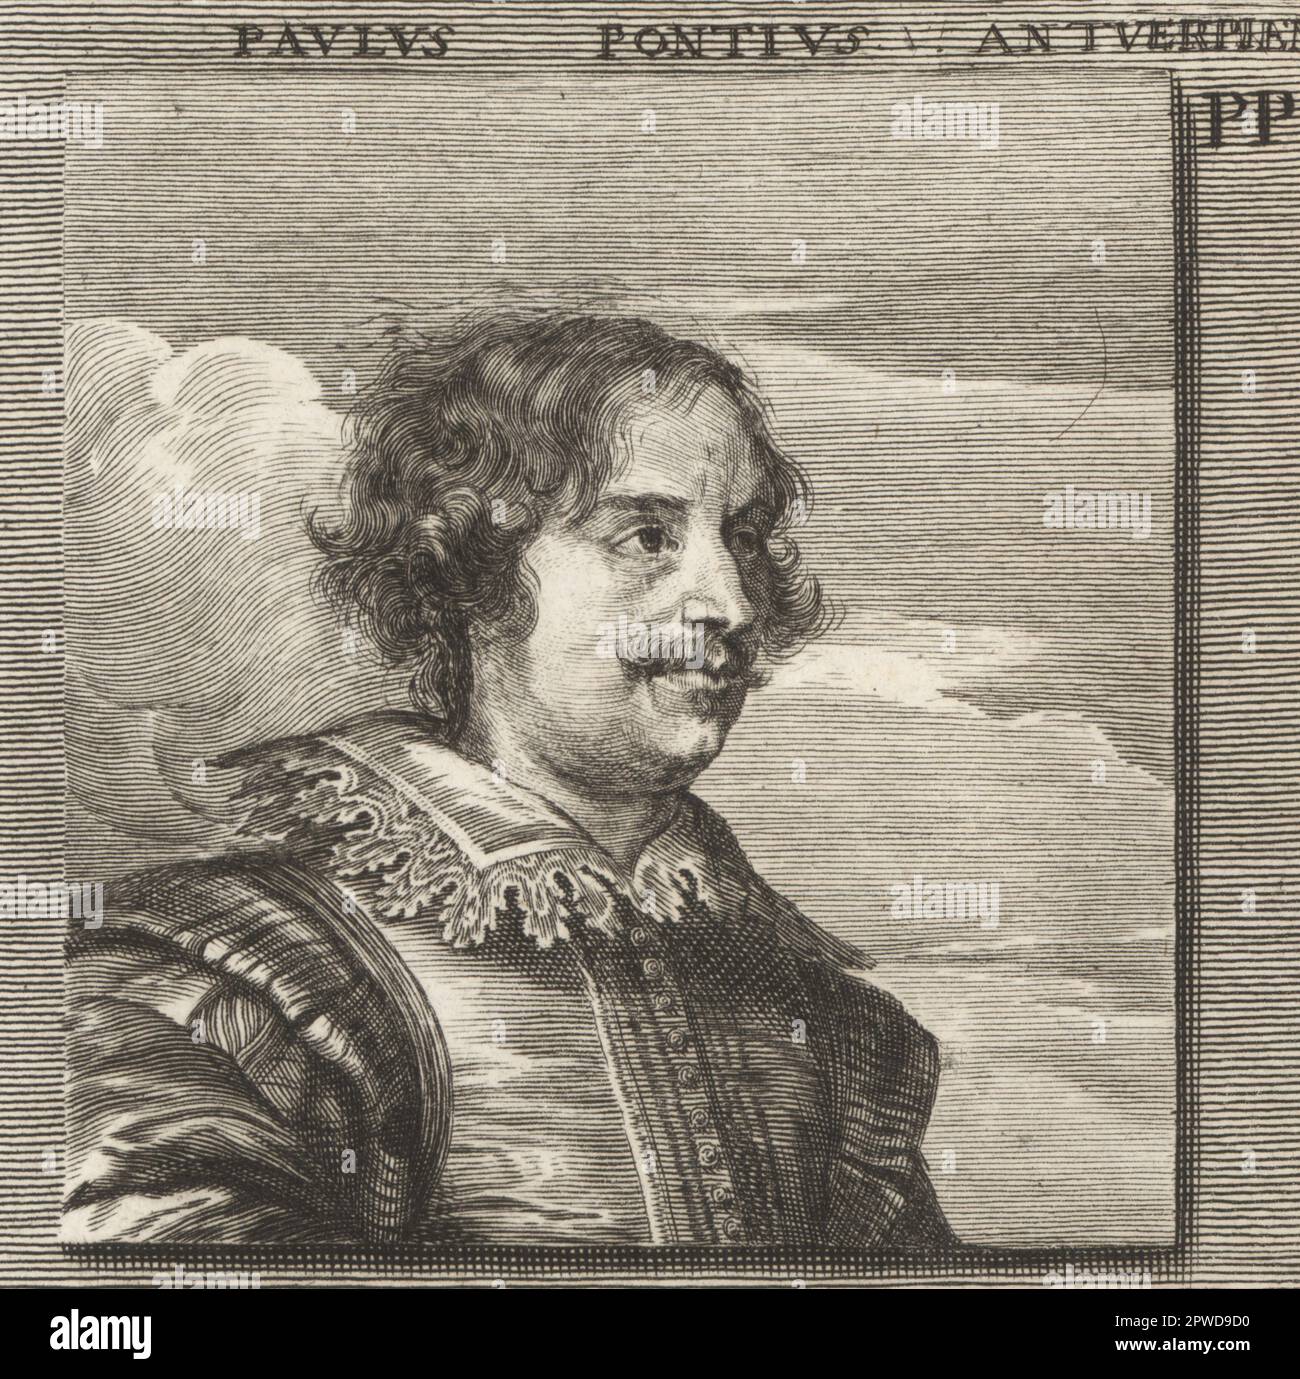 Paulus Pontius, Flemish engraver and painter from Antwerp, 1603-1658. A leading engraver connected with Peter Paul Rubens, Anthony van Dyck and Jacob Jordaens. Paulus Pontius Antverpien. Copperplate engraving after an illustration by Joachim von Sandrart from his L’Academia Todesca, della Architectura, Scultura & Pittura, oder Teutsche Academie, der Edlen Bau- Bild- und Mahlerey-Kunste, German Academy of Architecture, Sculpture and Painting, Jacob von Sandrart, Nuremberg, 1675. Stock Photo